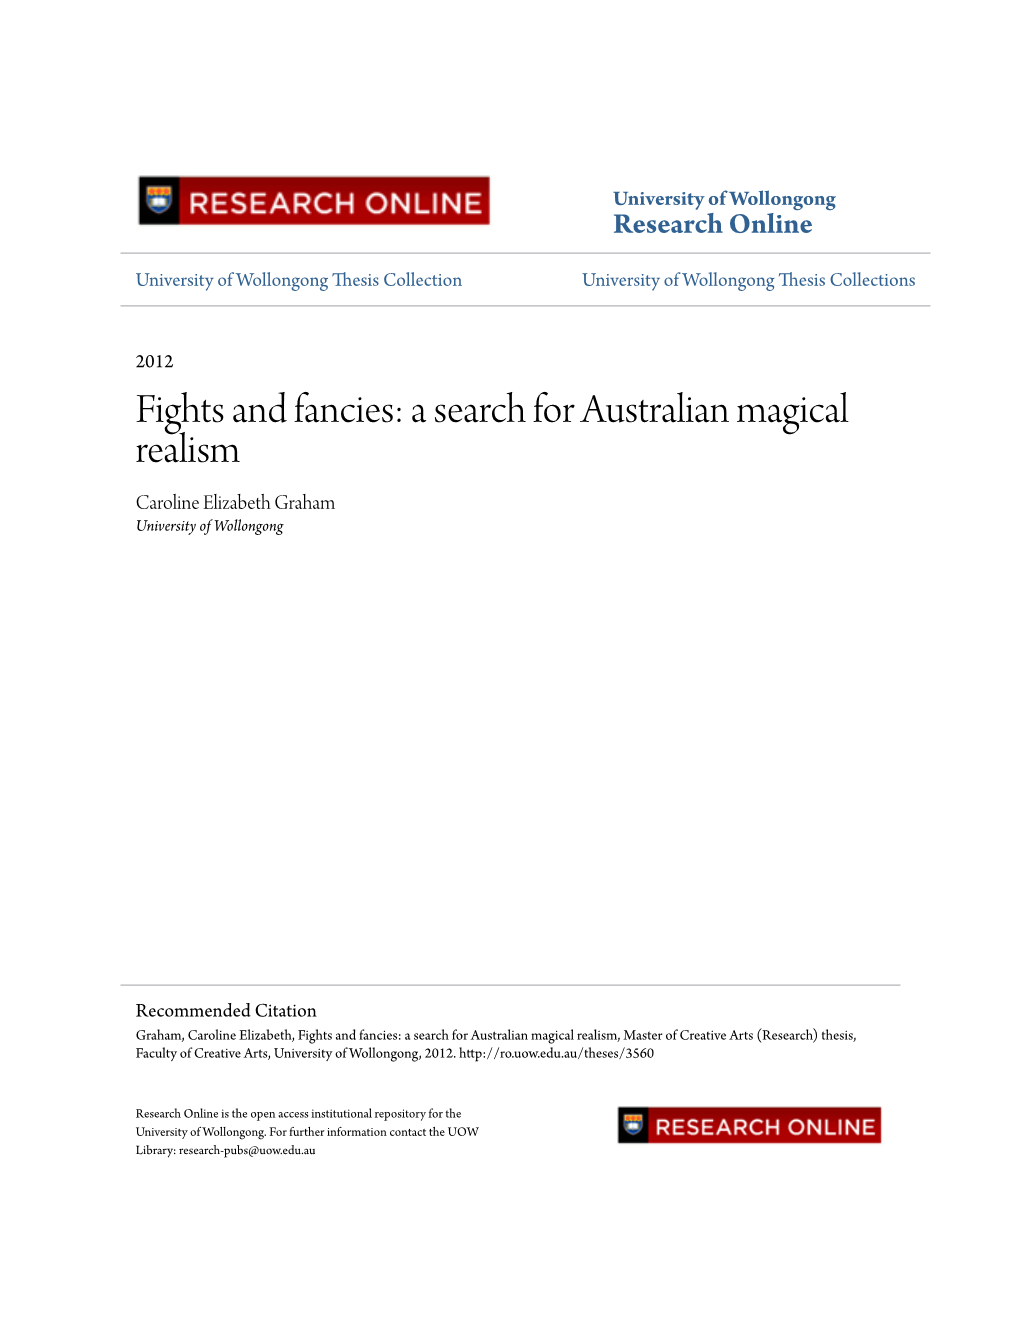 Fights and Fancies: a Search for Australian Magical Realism Caroline Elizabeth Graham University of Wollongong